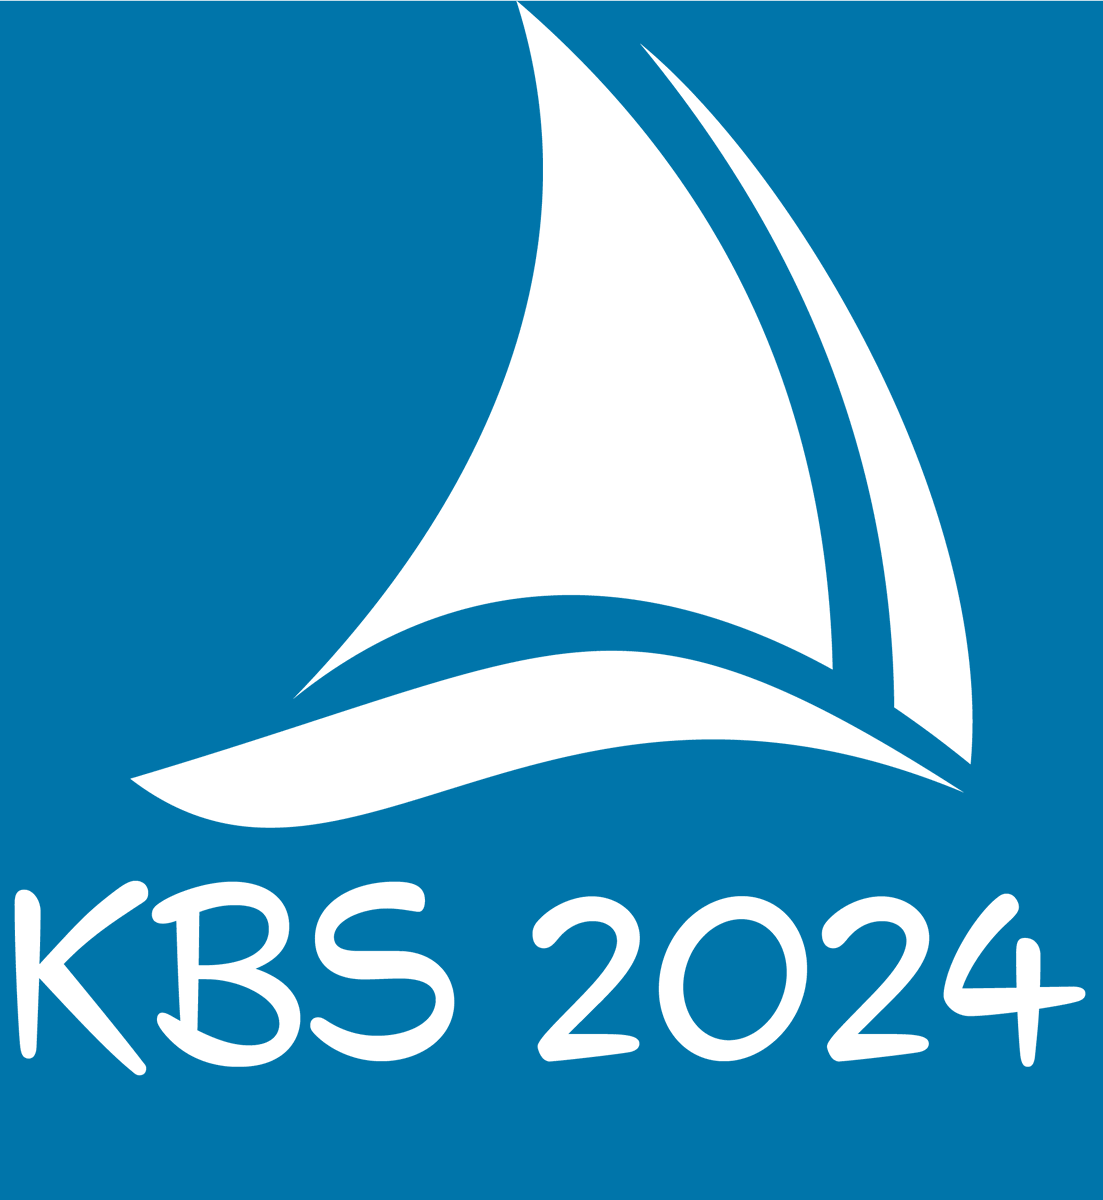 A little reminder to submit your abstract for the 49th Epidemiology Symposium of the Kettil Bruun Society (KBS), being held in Fremantle, Western Australia 27-31 May. Abstract (and financial aid applications) close next week. kbs2024perth.org/abstract-submi… for all the details #KBSconf